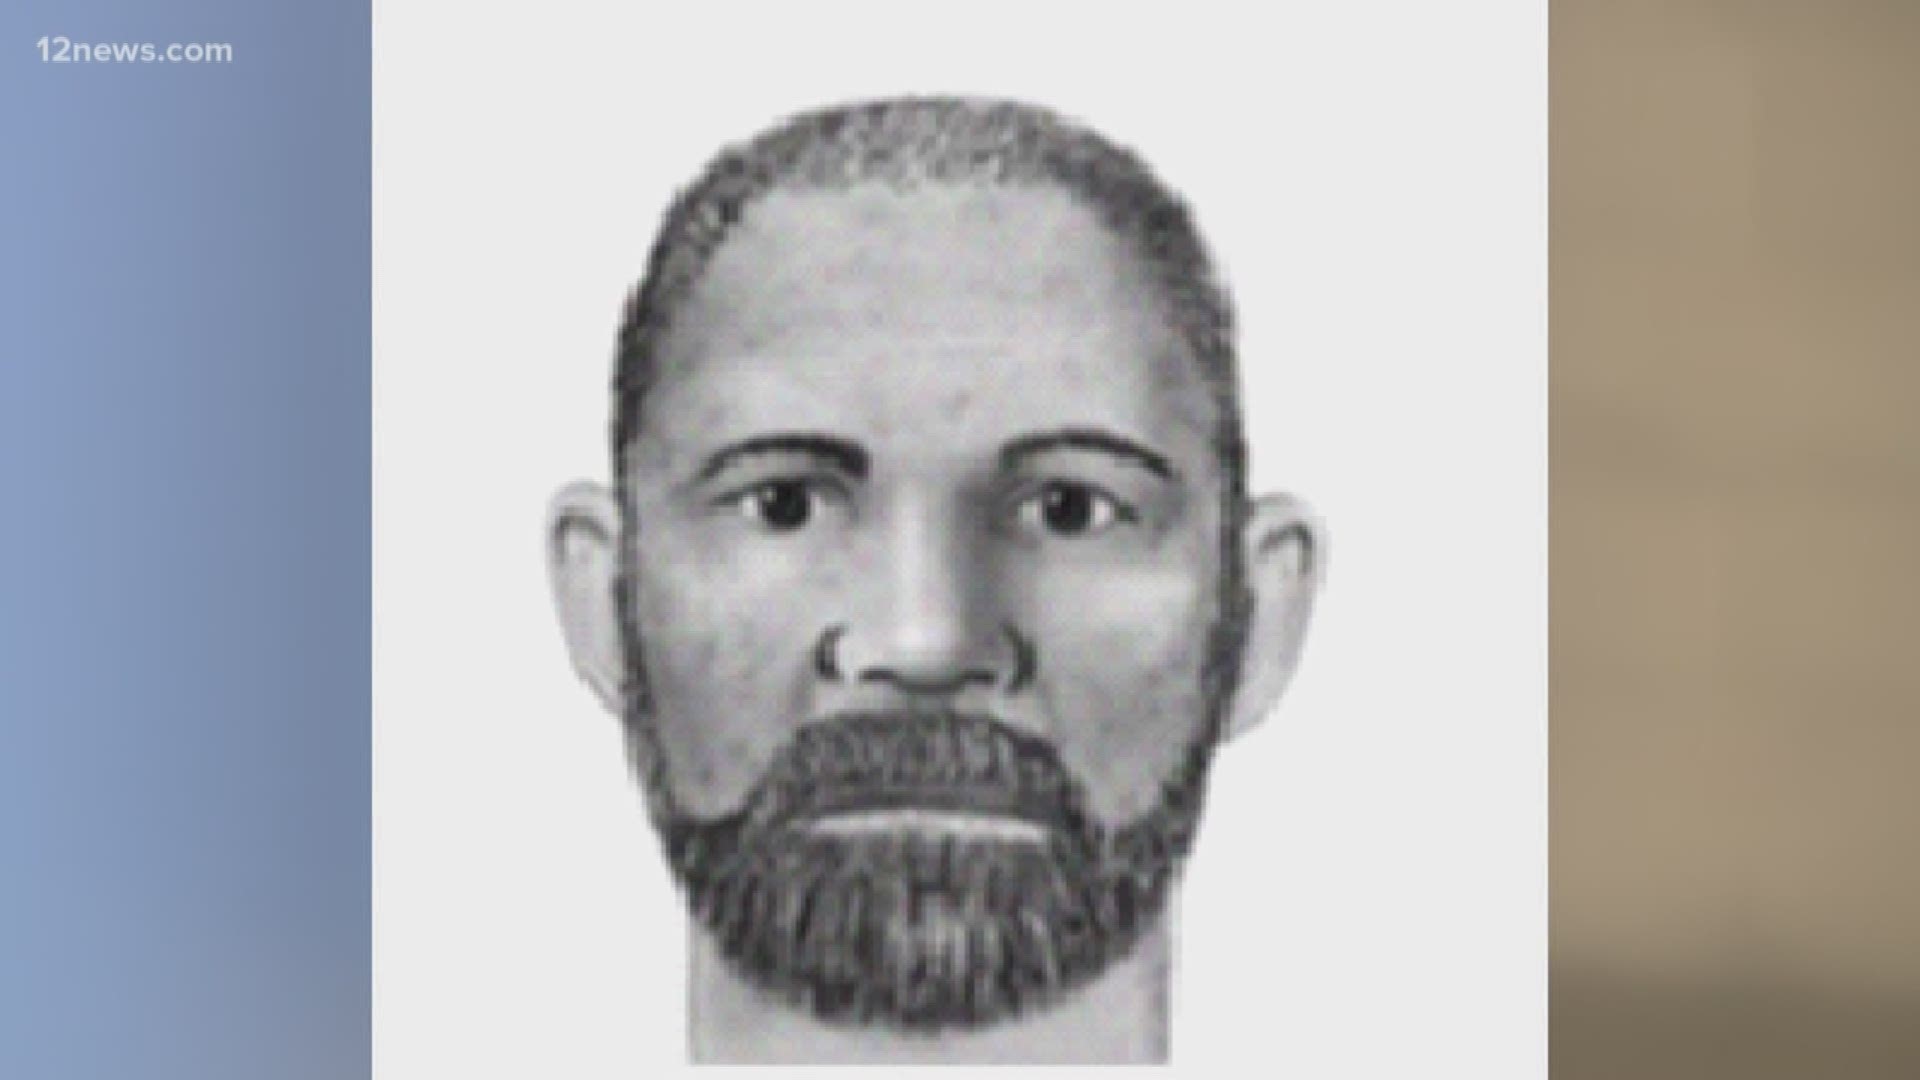 Avondale police released a sketch of a man accused of sexually assaulting a child at an Avondale park Wednesday afternoon.